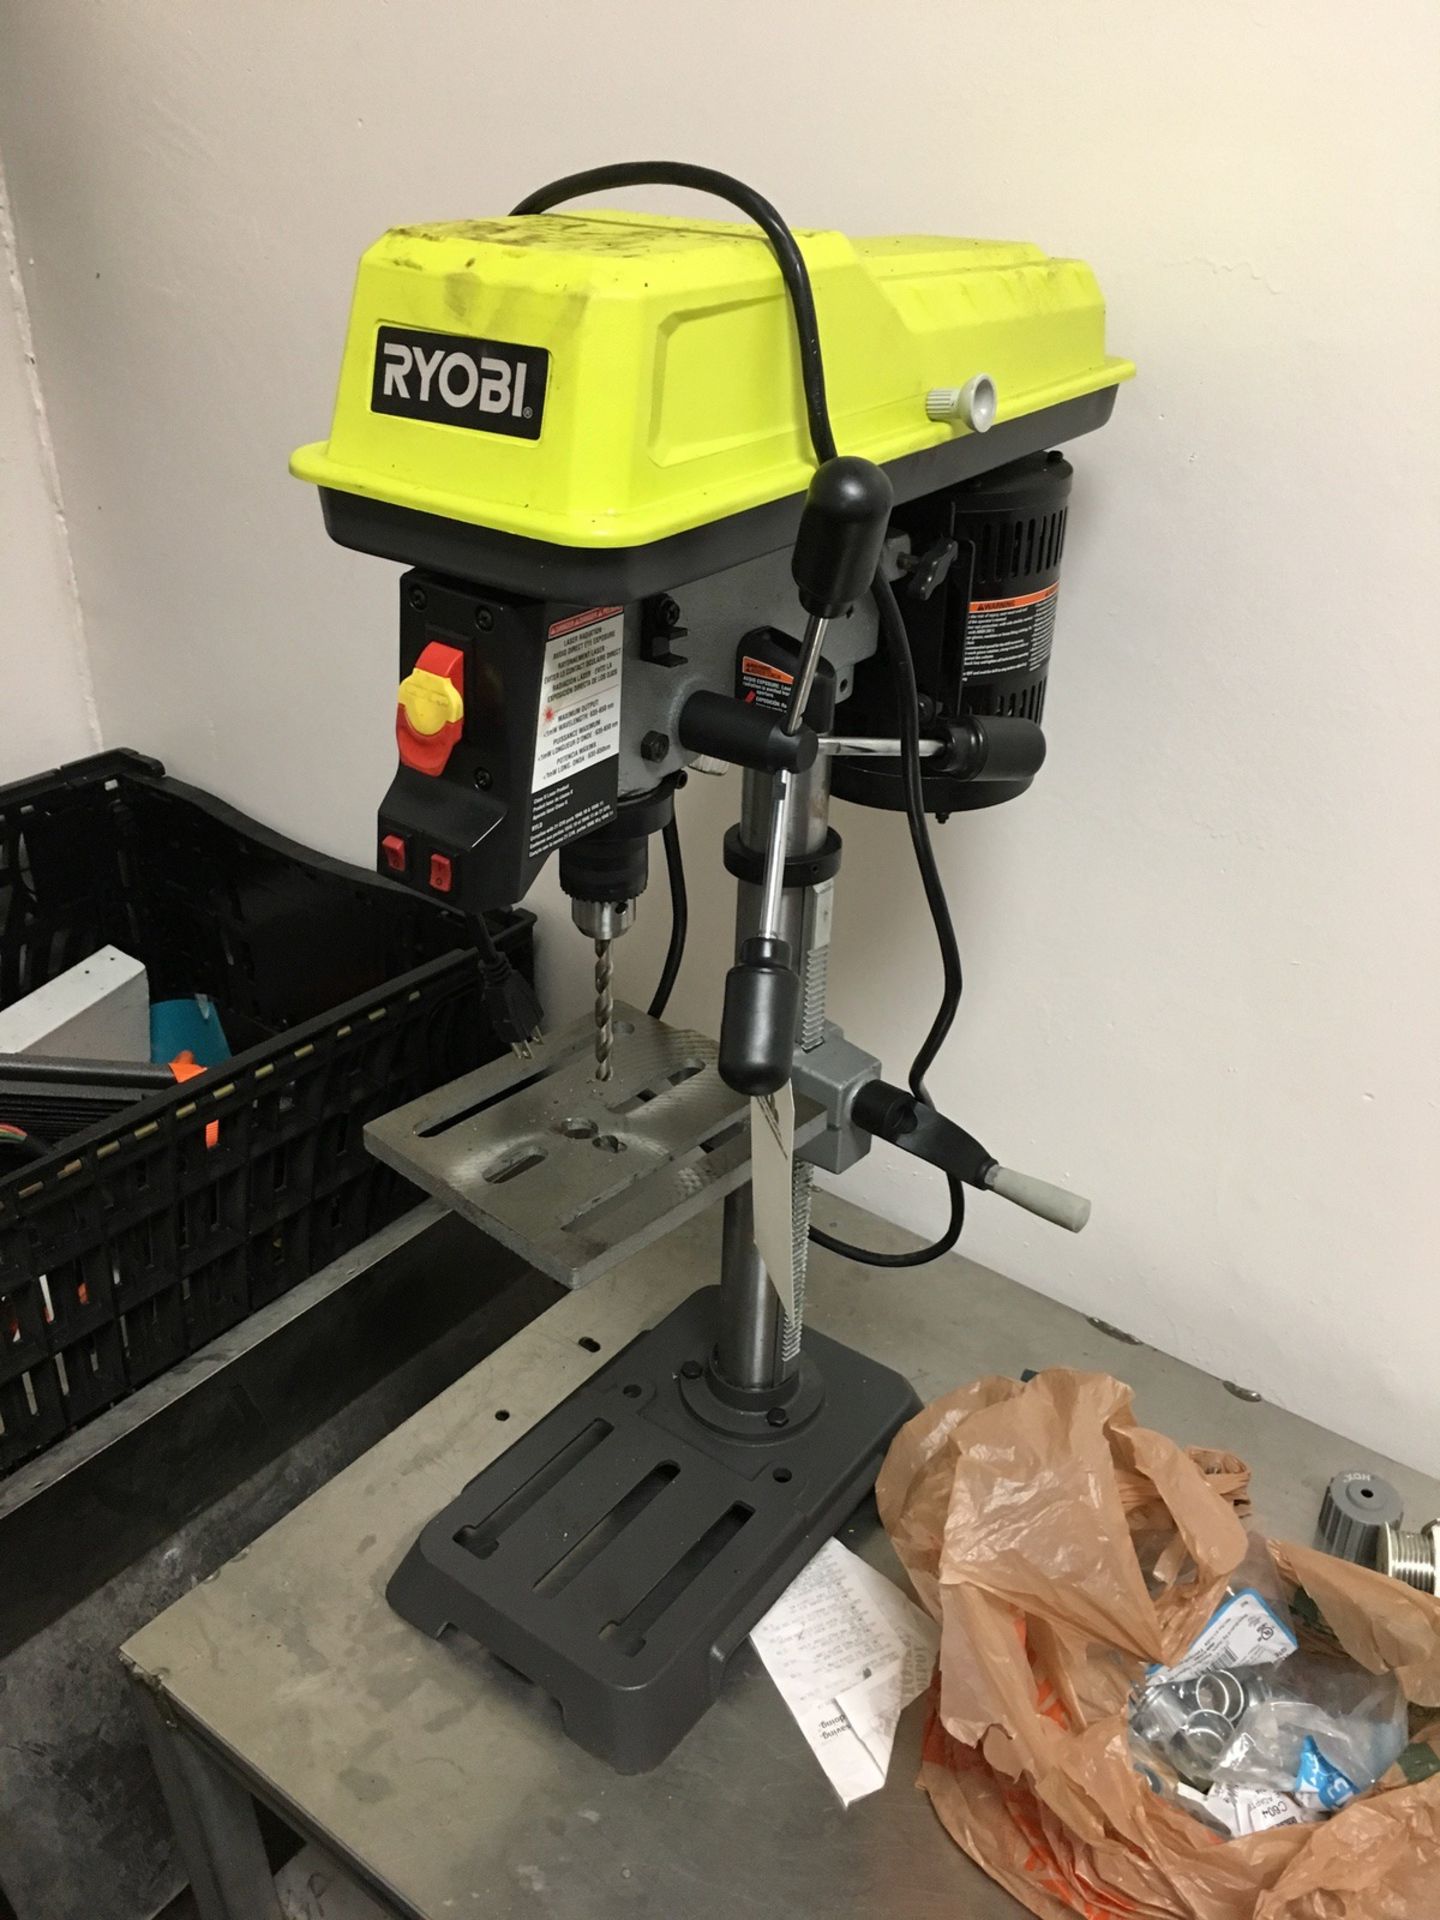 Ryobi 10in Bench Drill Press, 600-2800 RPM, Model DP 103L | Rig Fee: No Charge